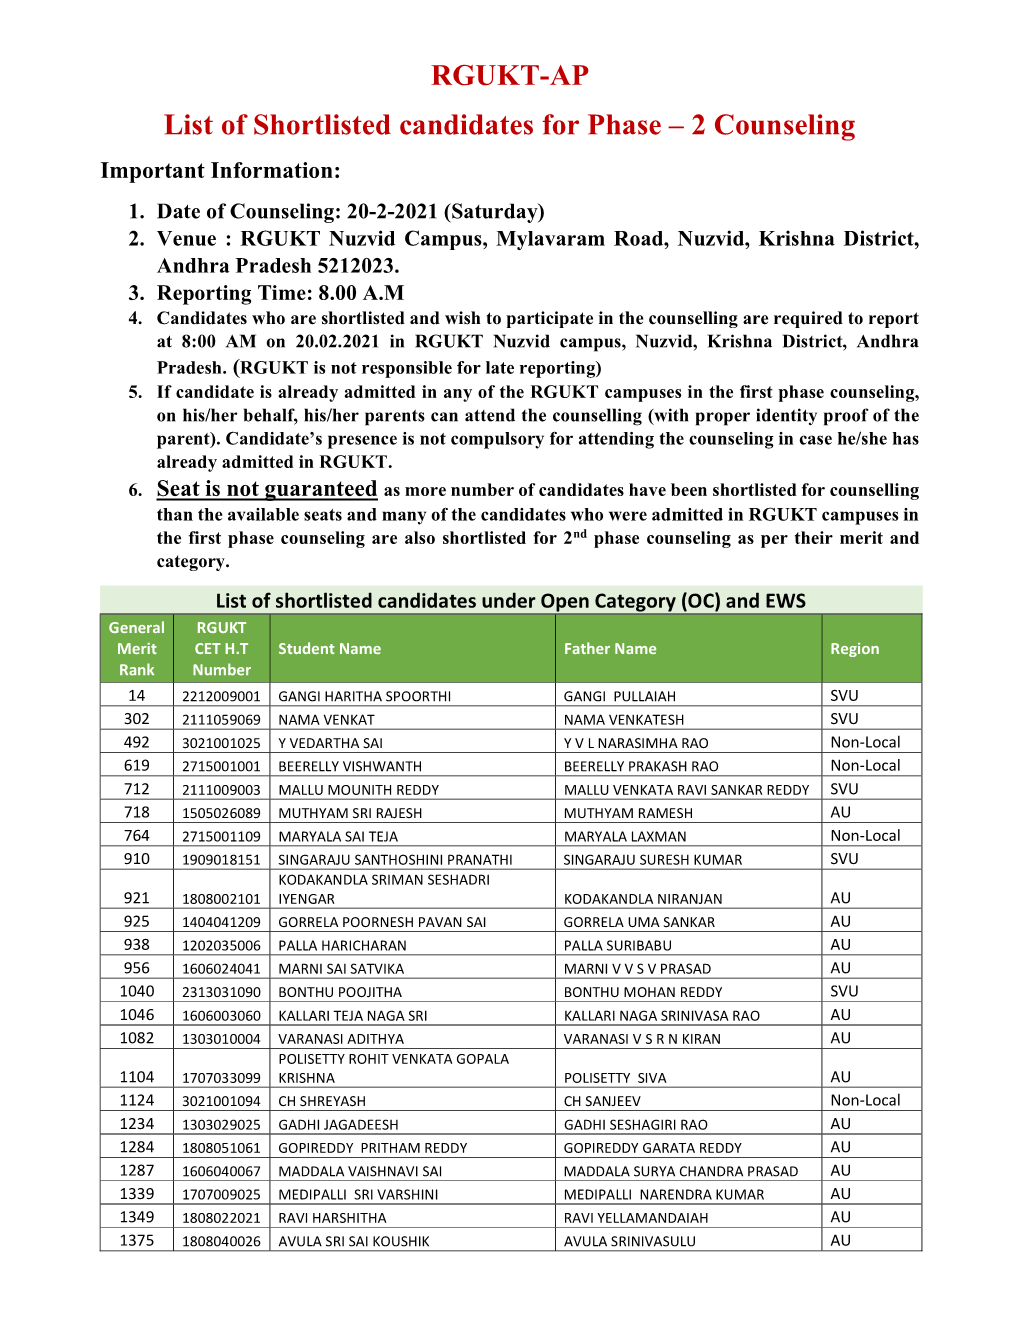 RGUKT-AP List of Shortlisted Candidates for Phase – 2 Counseling Important Information: 1